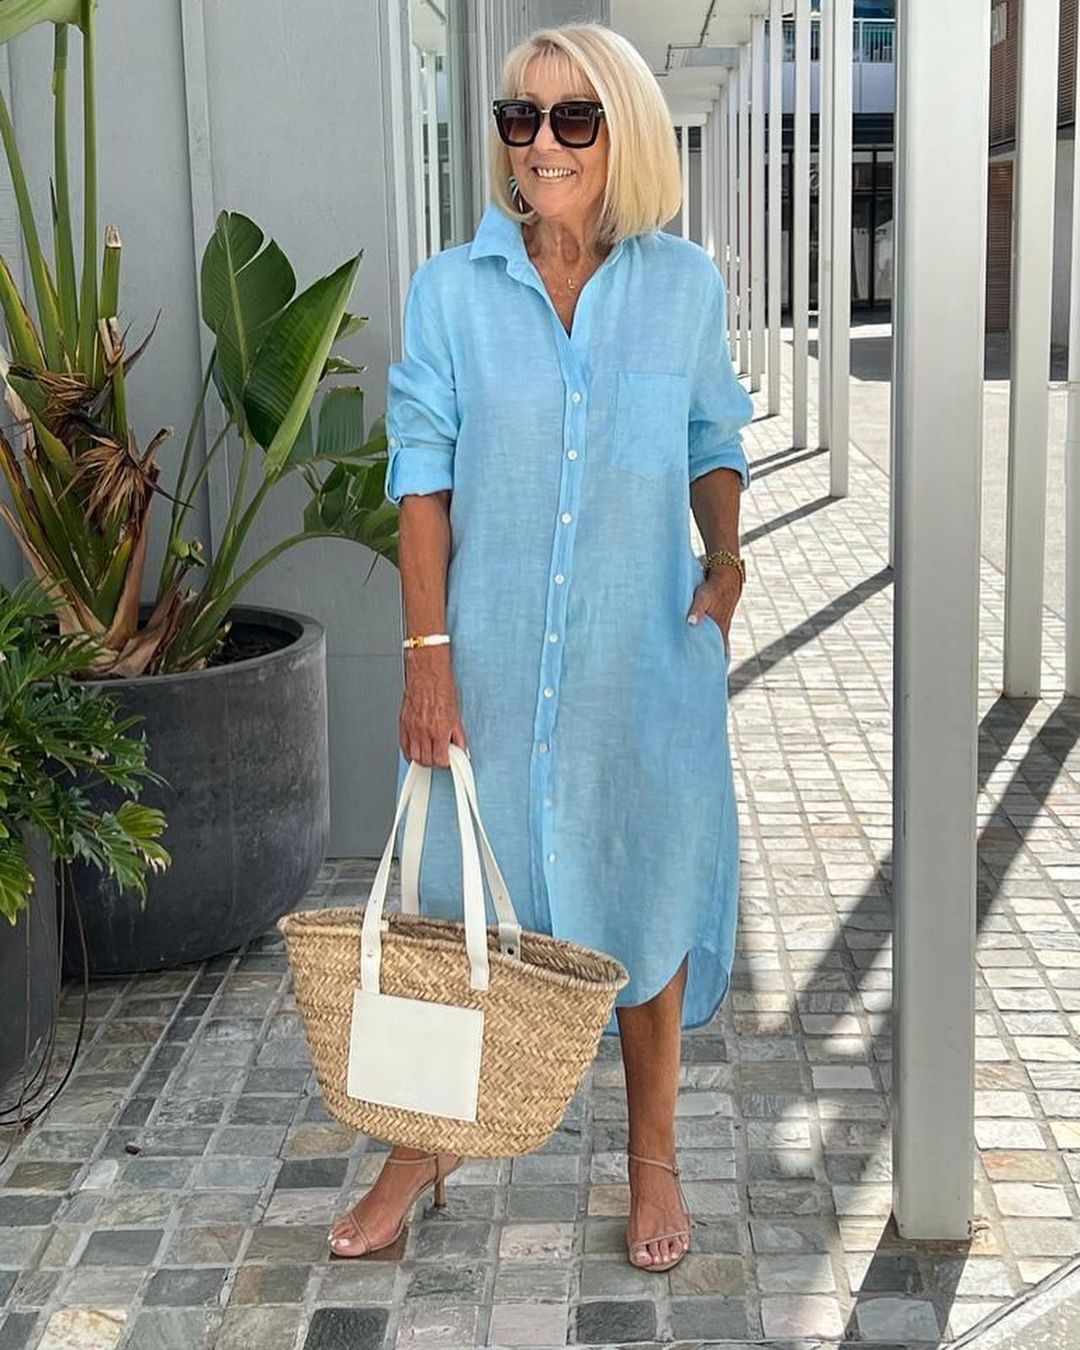 Best Sellers Fashion For Older Women | Clothes For Women Over 50, 60 ...